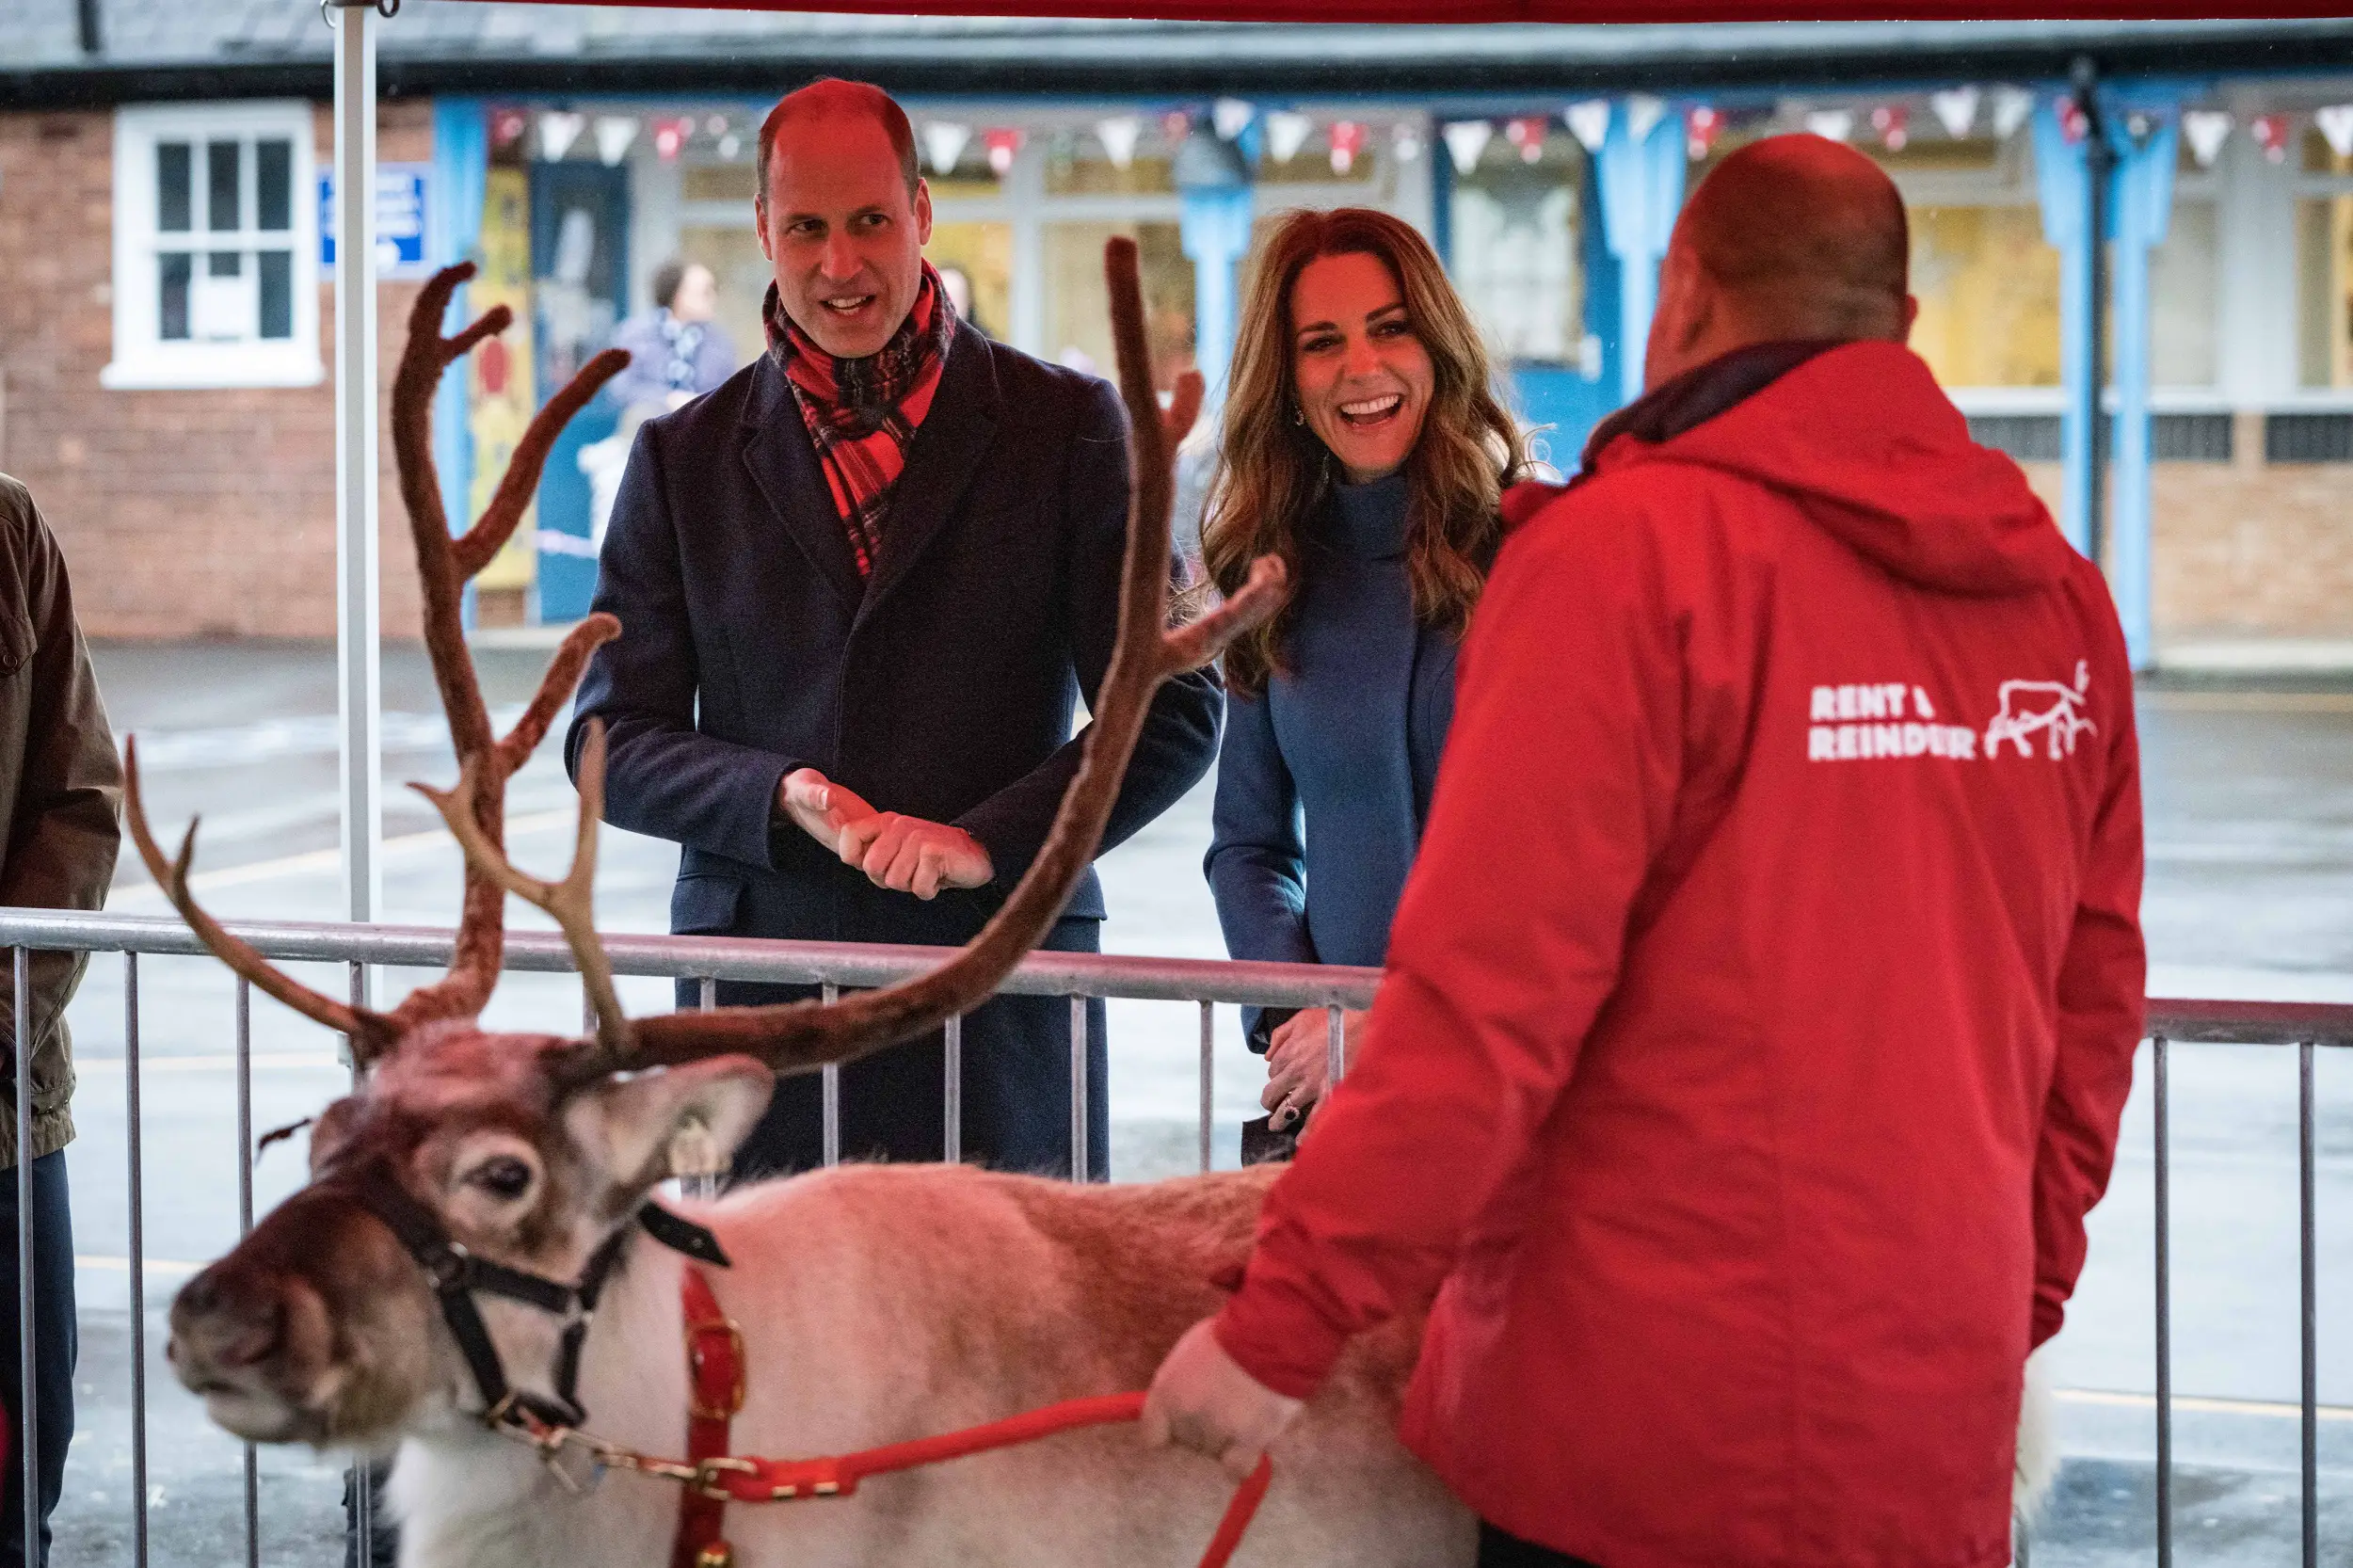 The Duke and Duchess of Cambridge met with three reindeer - Chaz, Crackers and six-month-old Echols in Berwick upon Tweed